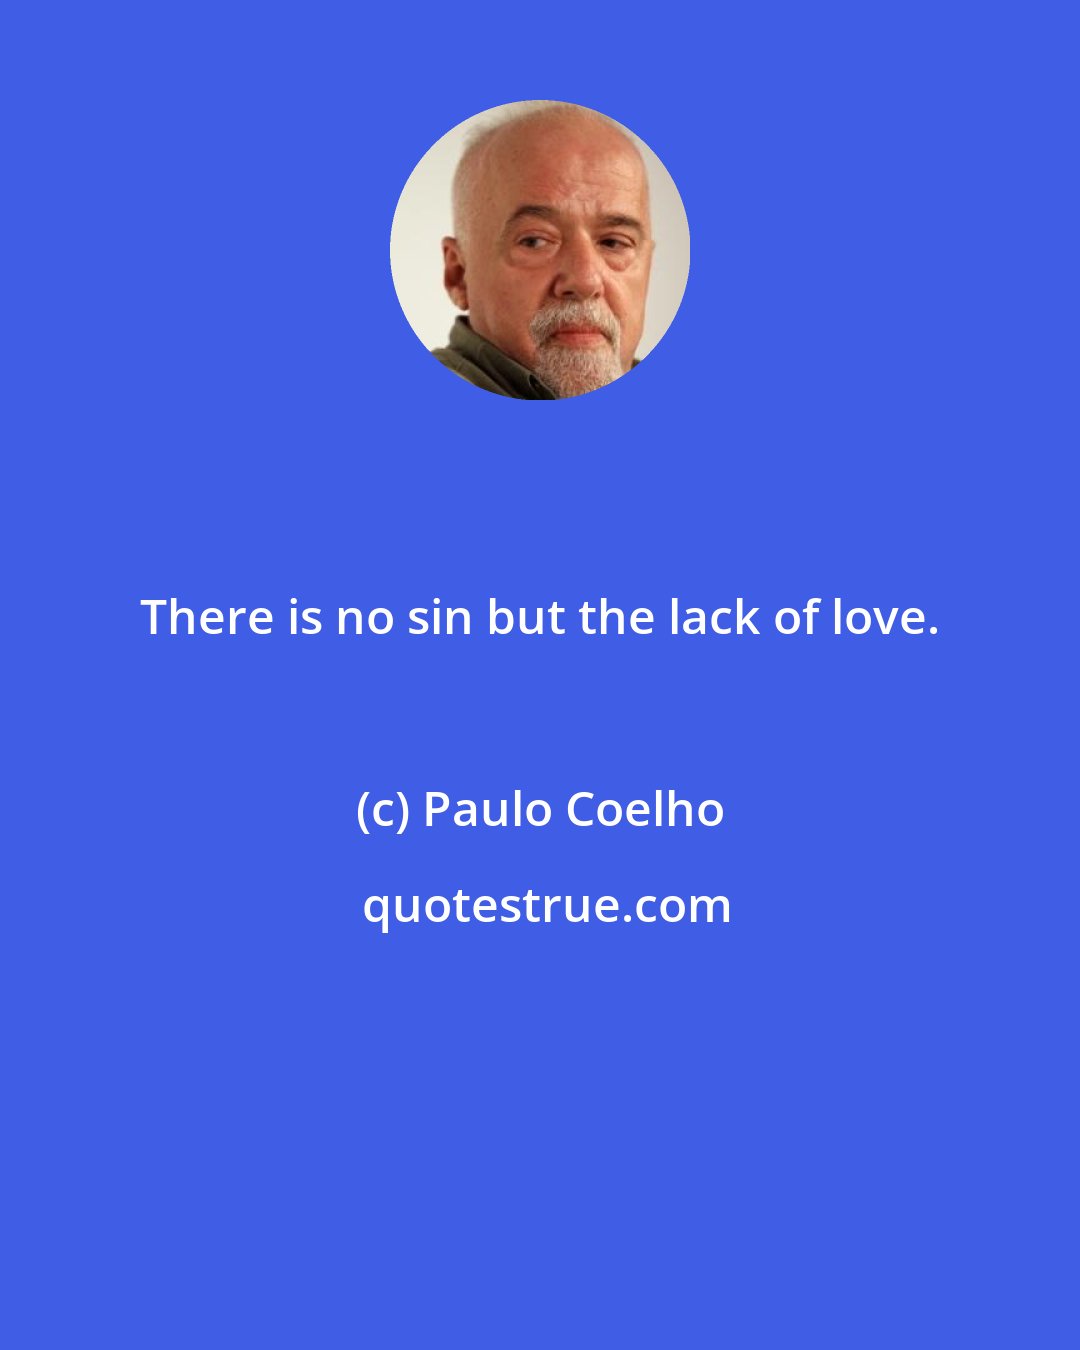 Paulo Coelho: There is no sin but the lack of love.